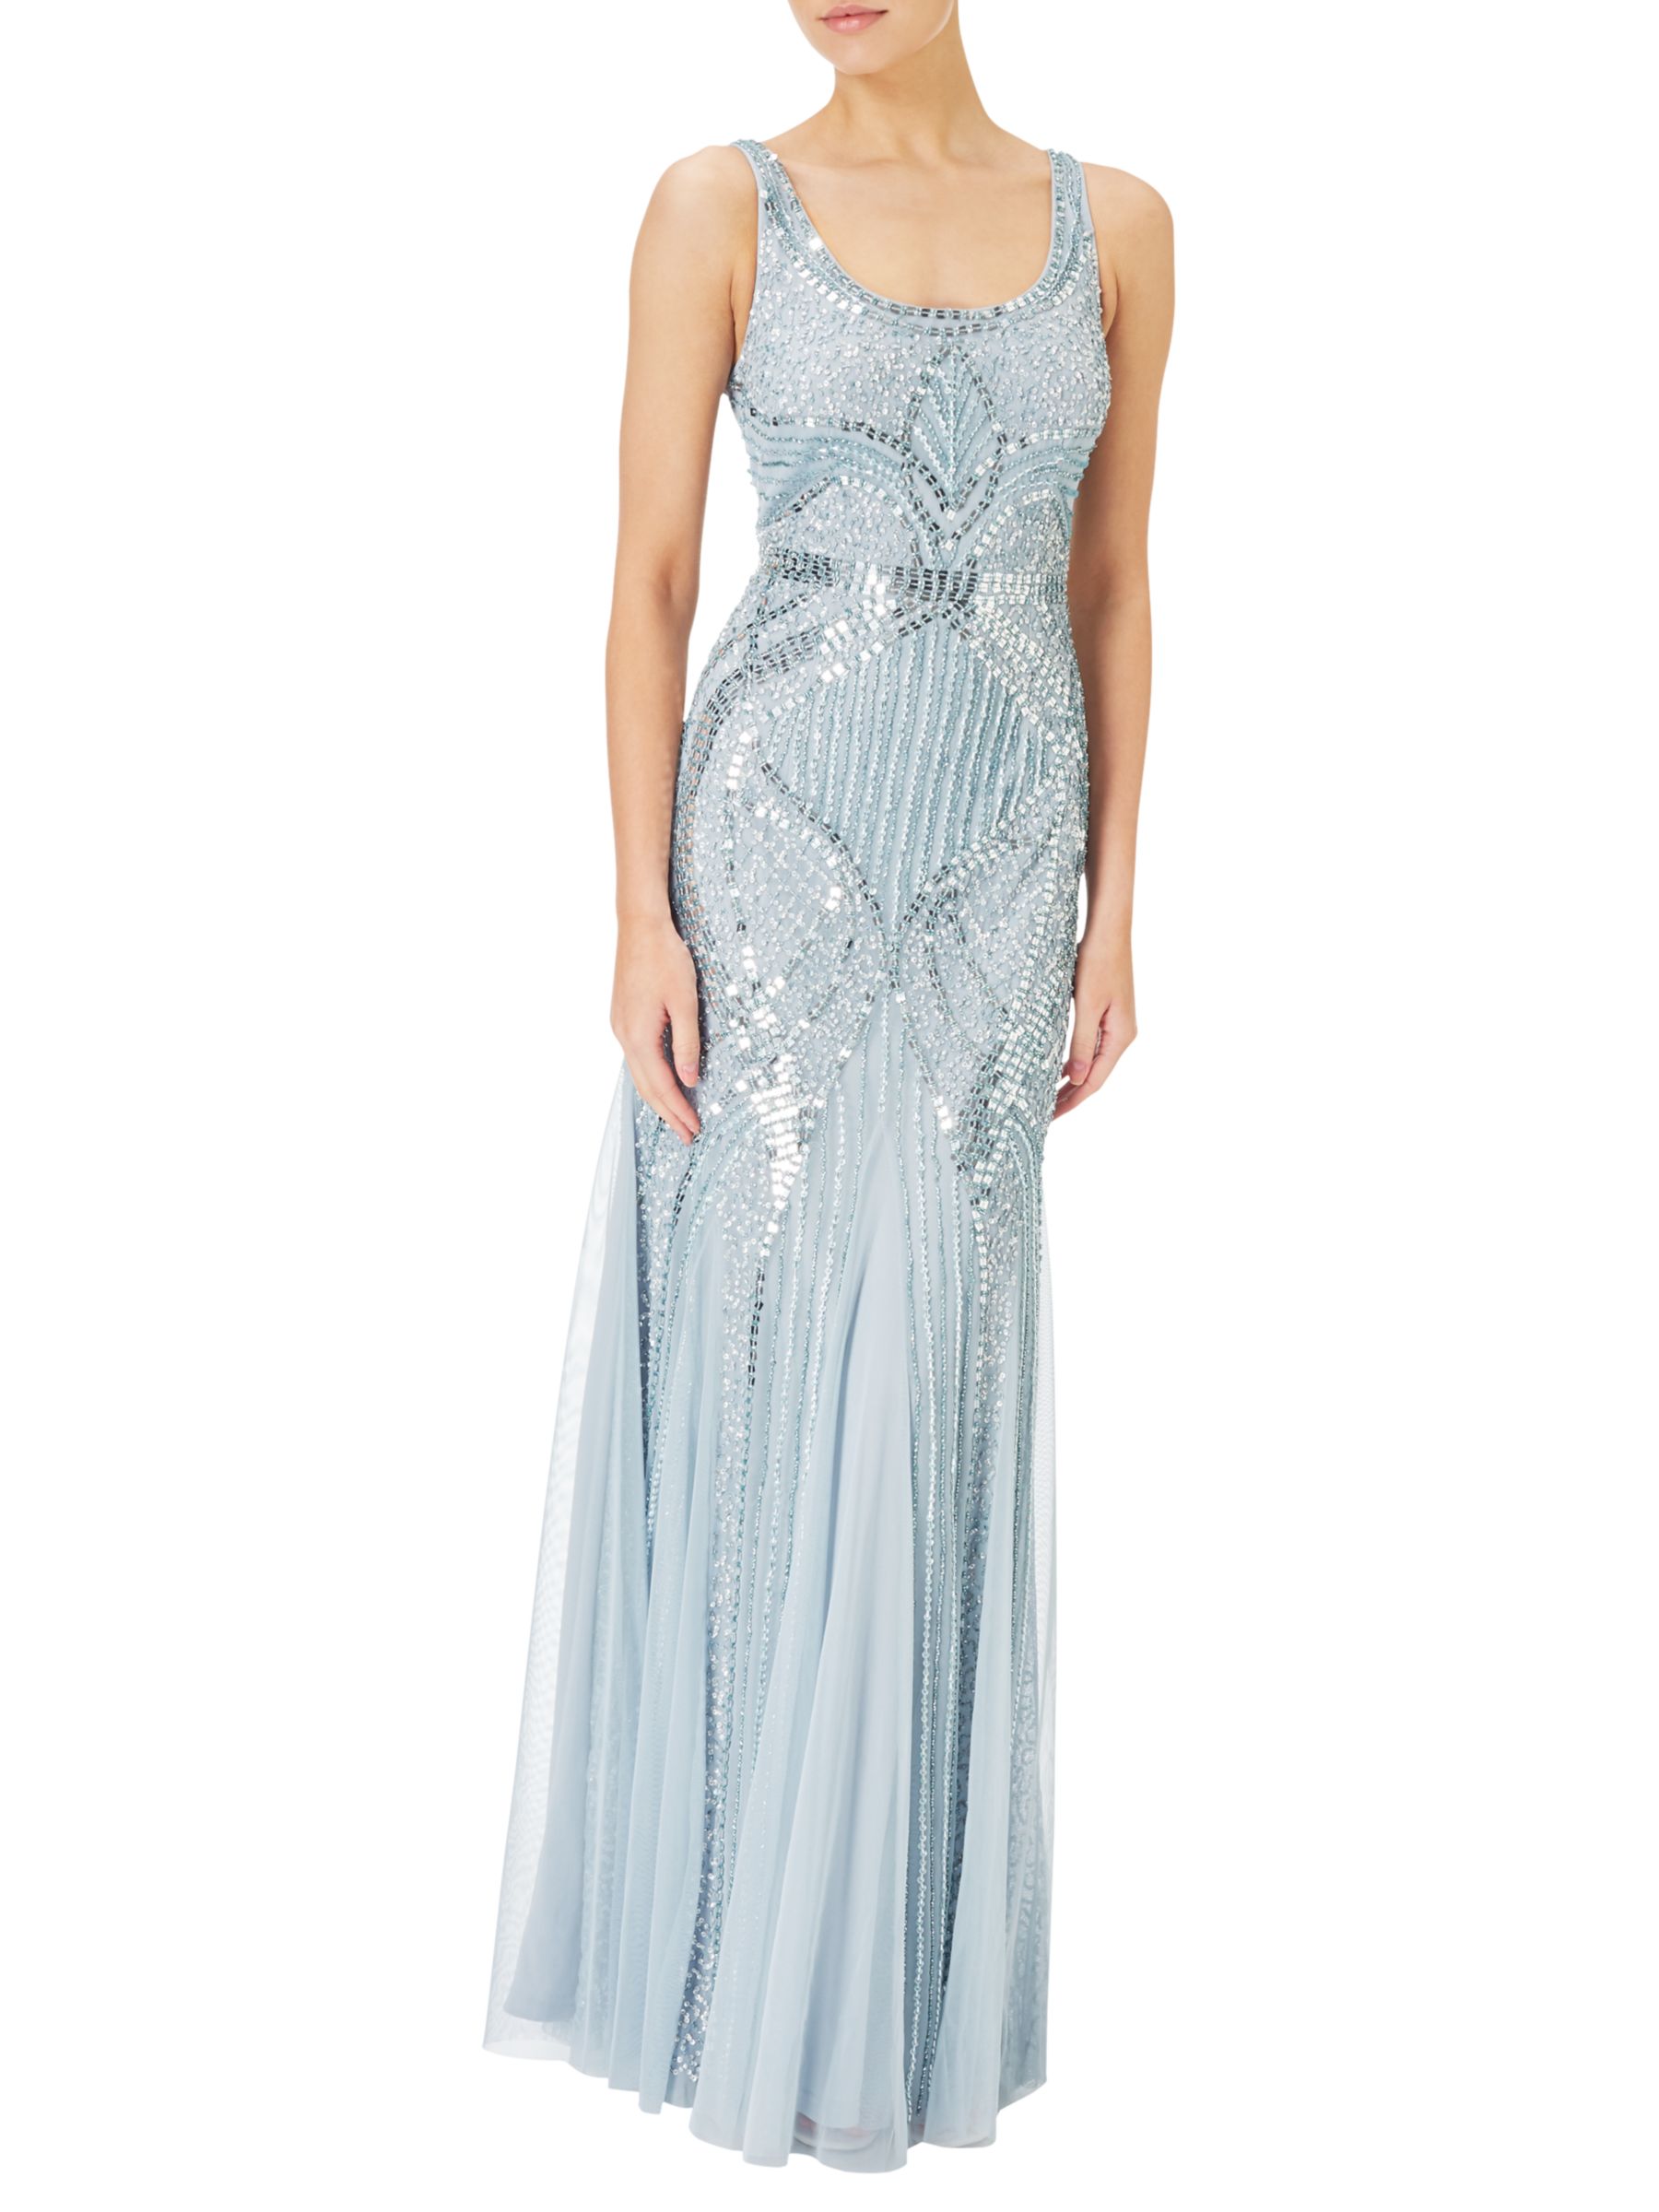 Adrianna Papell Sleeveless Beaded Gown, Blue Heather at John Lewis ...